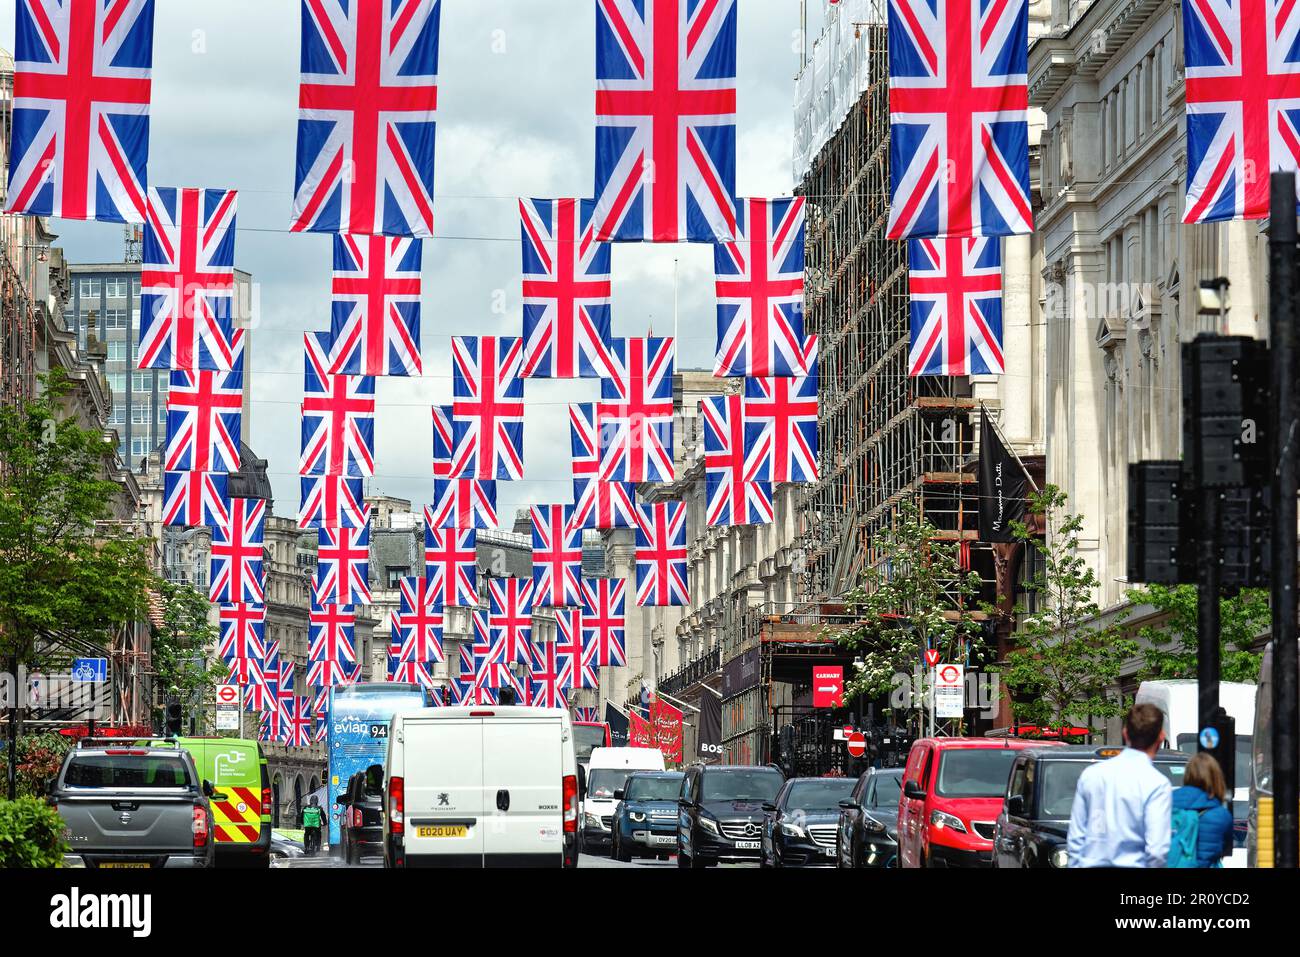 A spectacular display of Union Jack flags in Regent Street to celebrate the coronation of King Charles Third Central London England UK Stock Photo